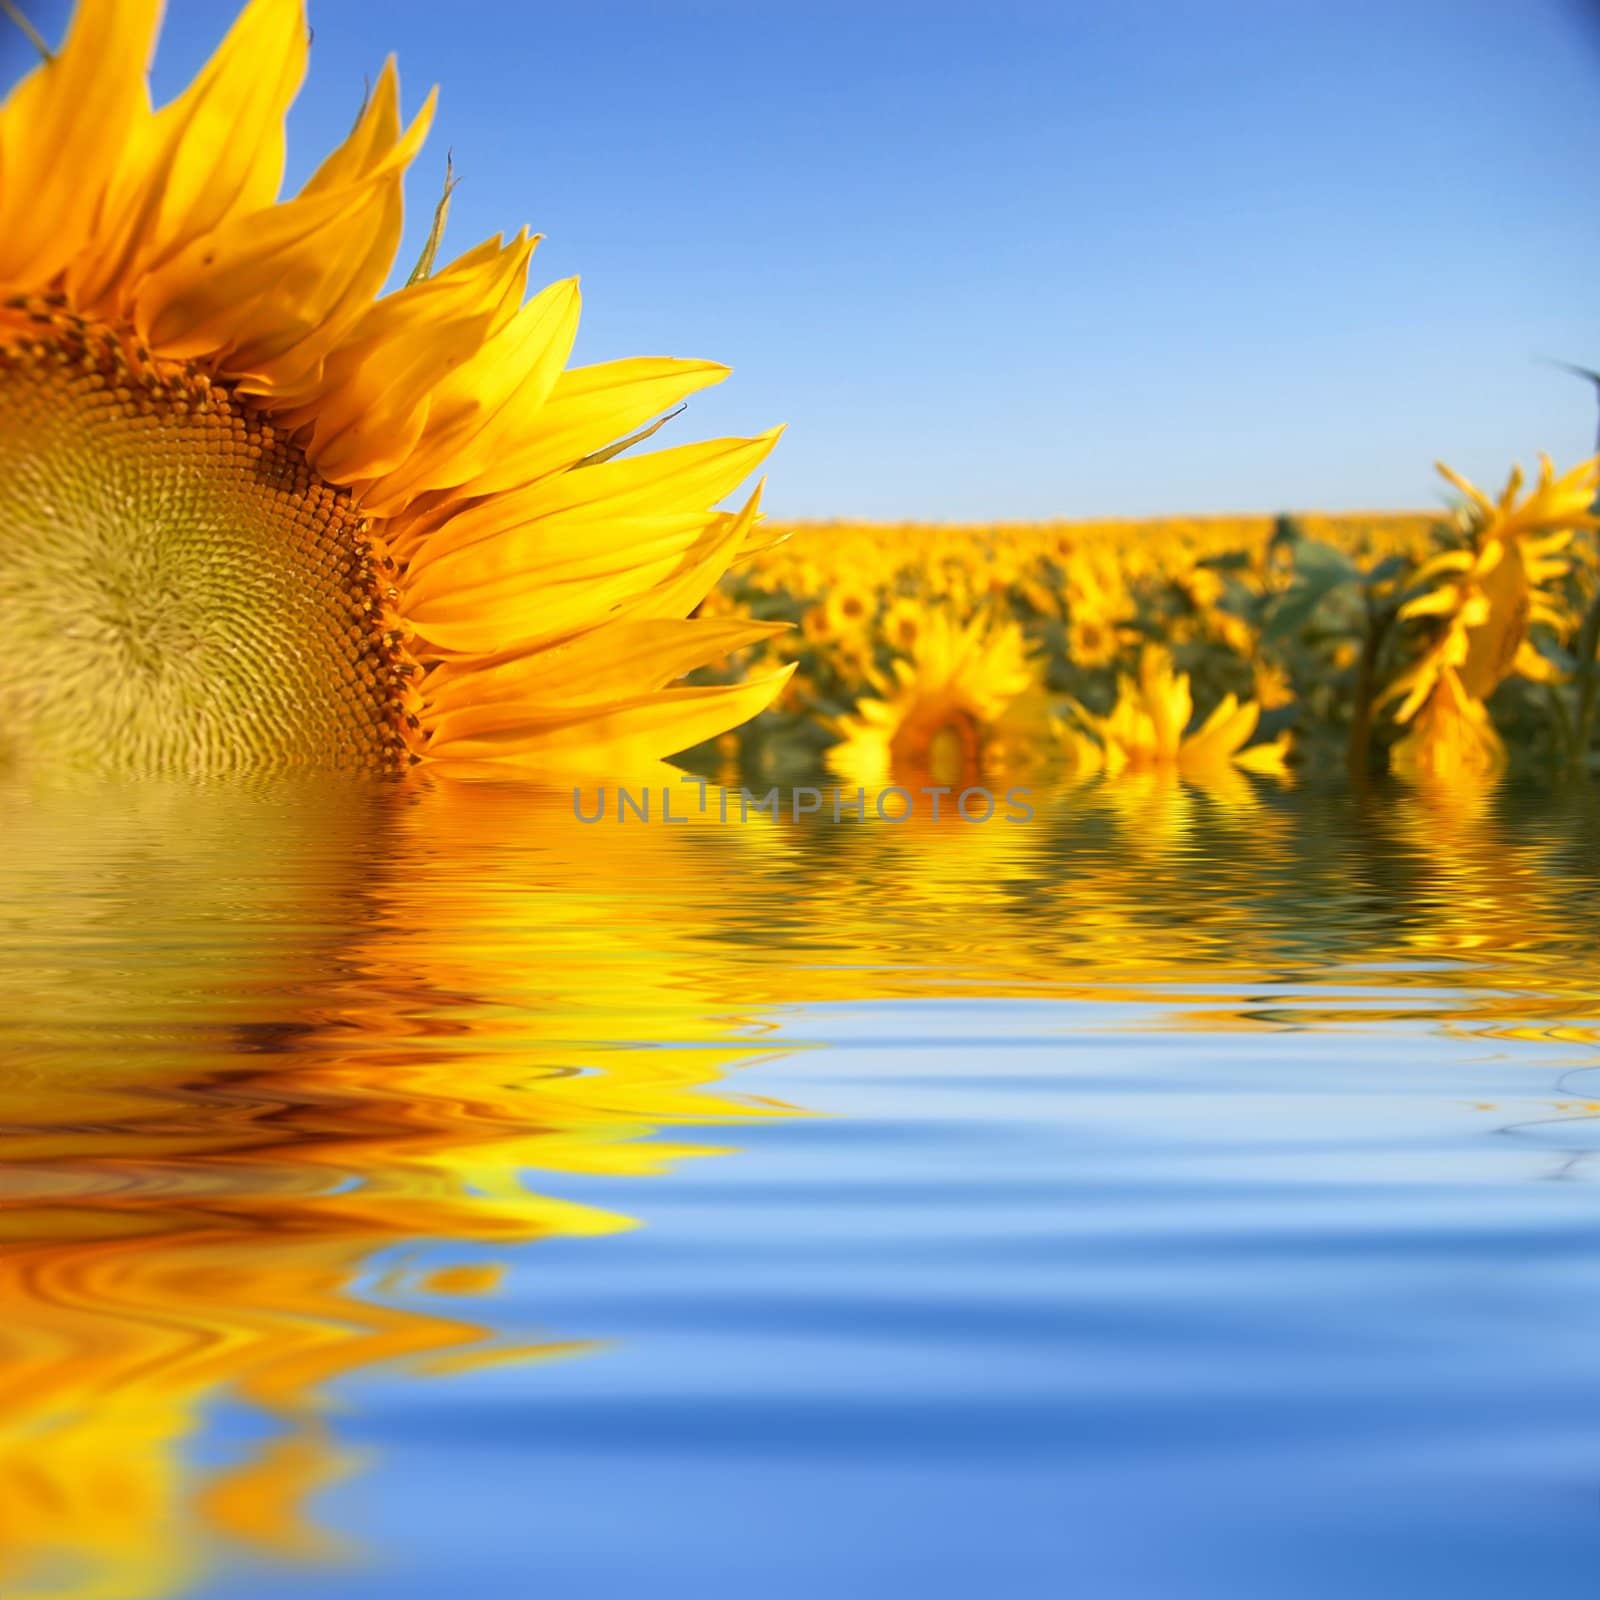 An image of sunflowers on background of sky